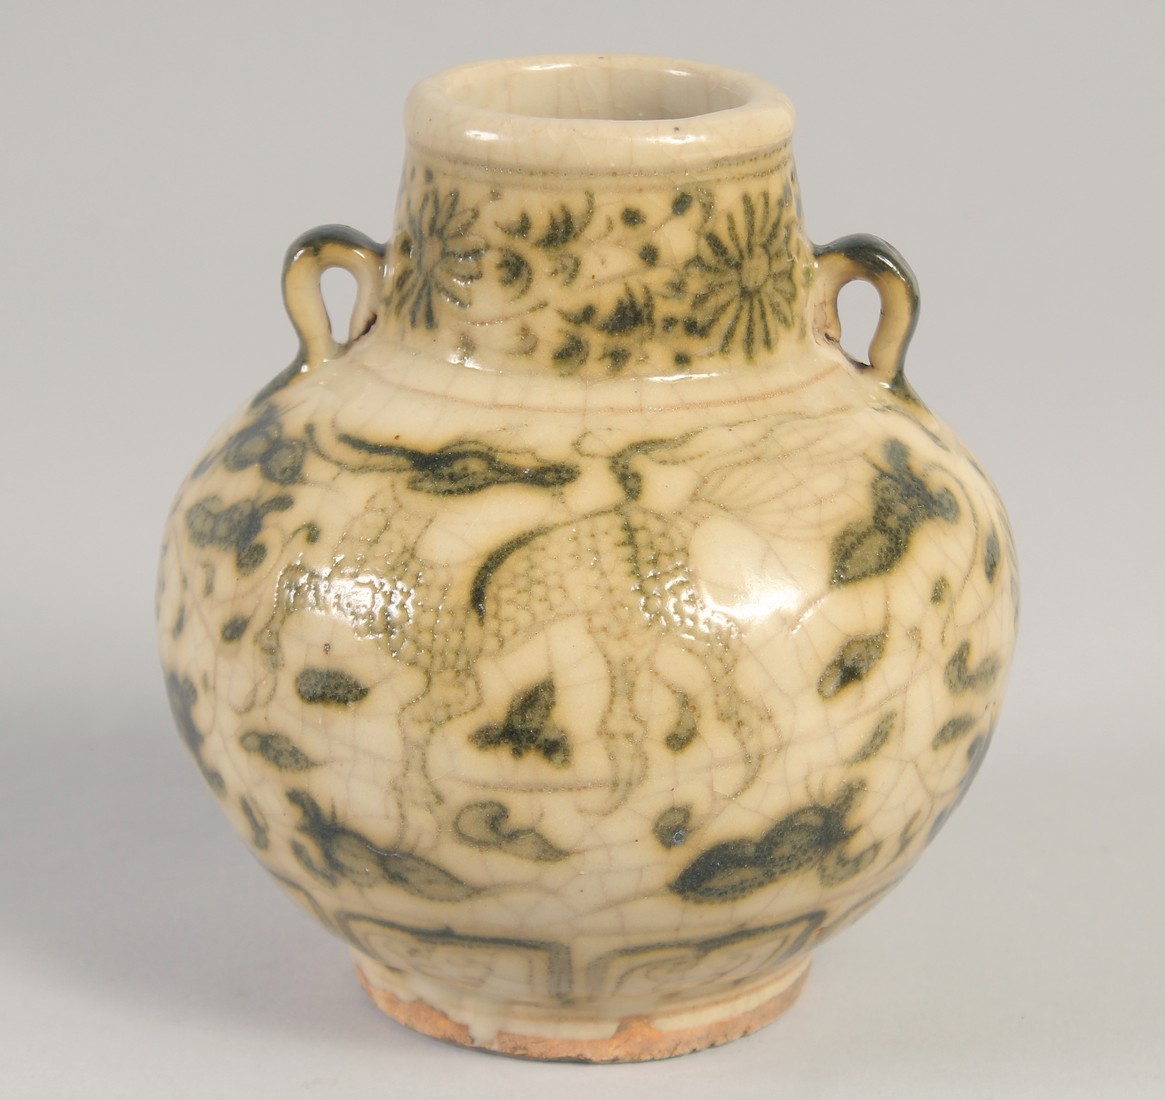 A THAI GLAZED POTTERY VASE, painted with beasts, 13.5cm high. - Image 5 of 6